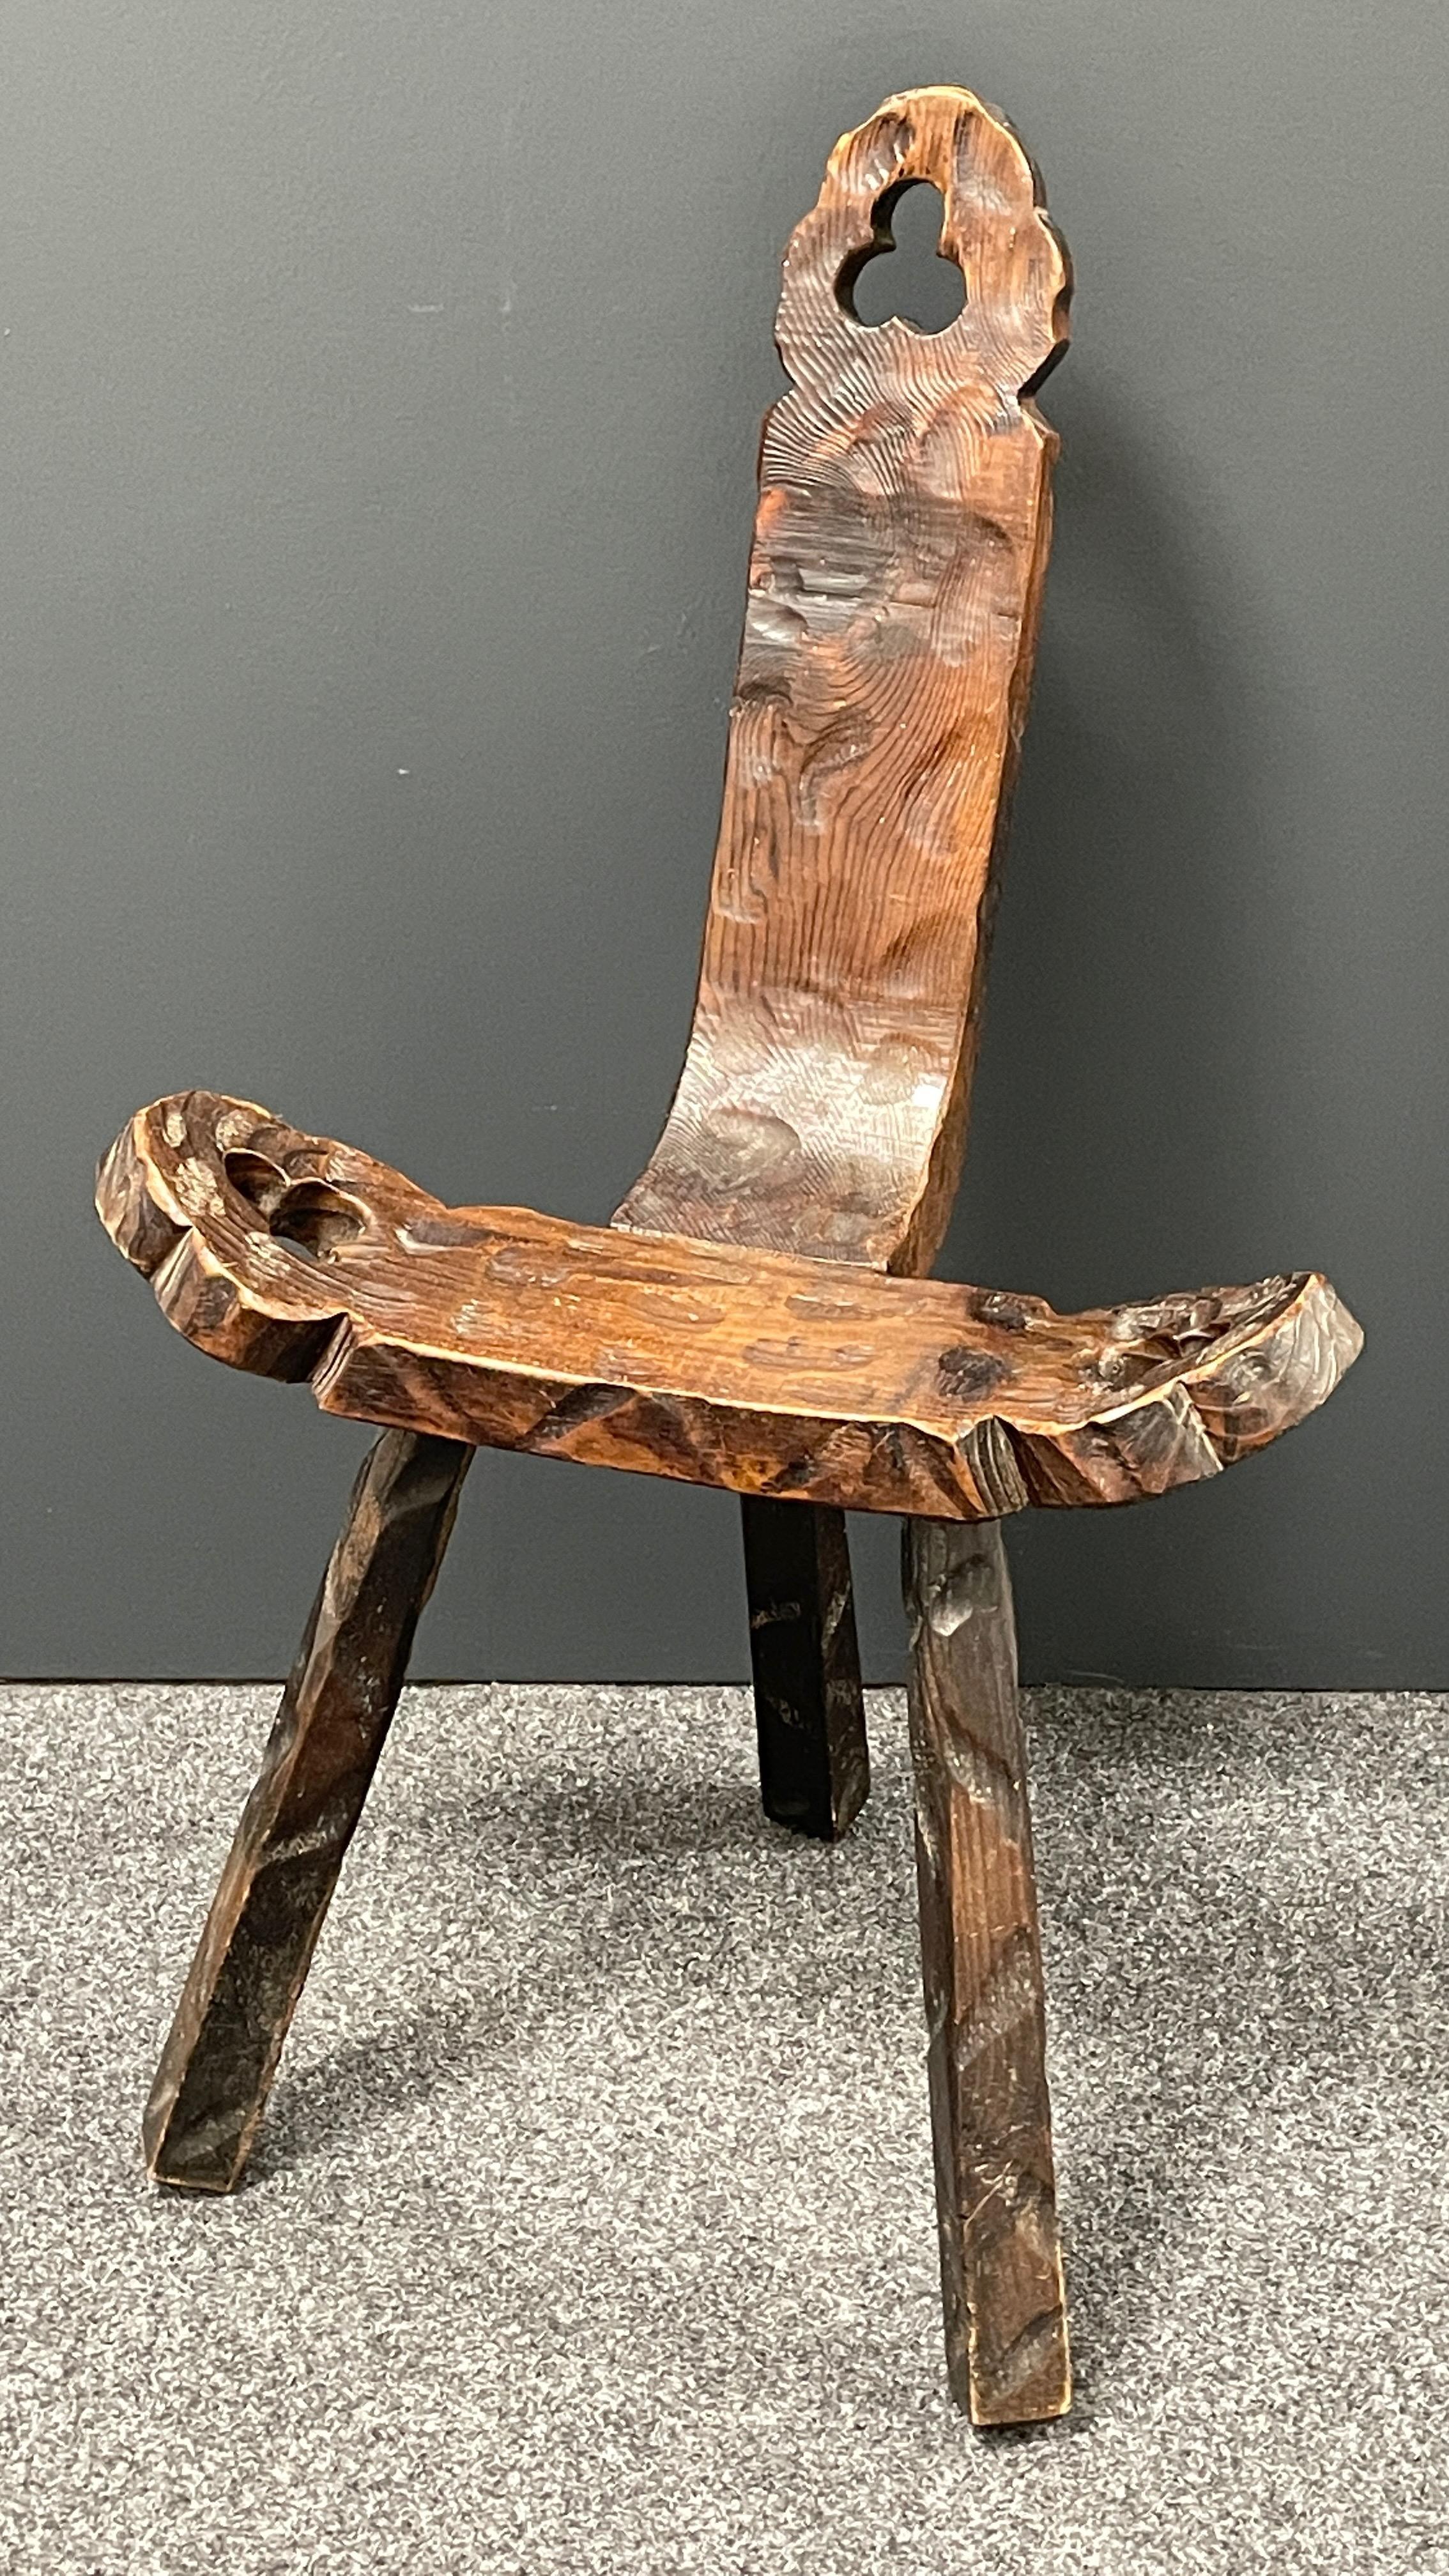 Interesting brutalist wood tripod chair from Spain. Notched holes in head rest and both arms. Historically used as a birthing chair. Great piece of functional sculpture. Good condition to wood. One leg a little wobbly which doesn't affect stability.